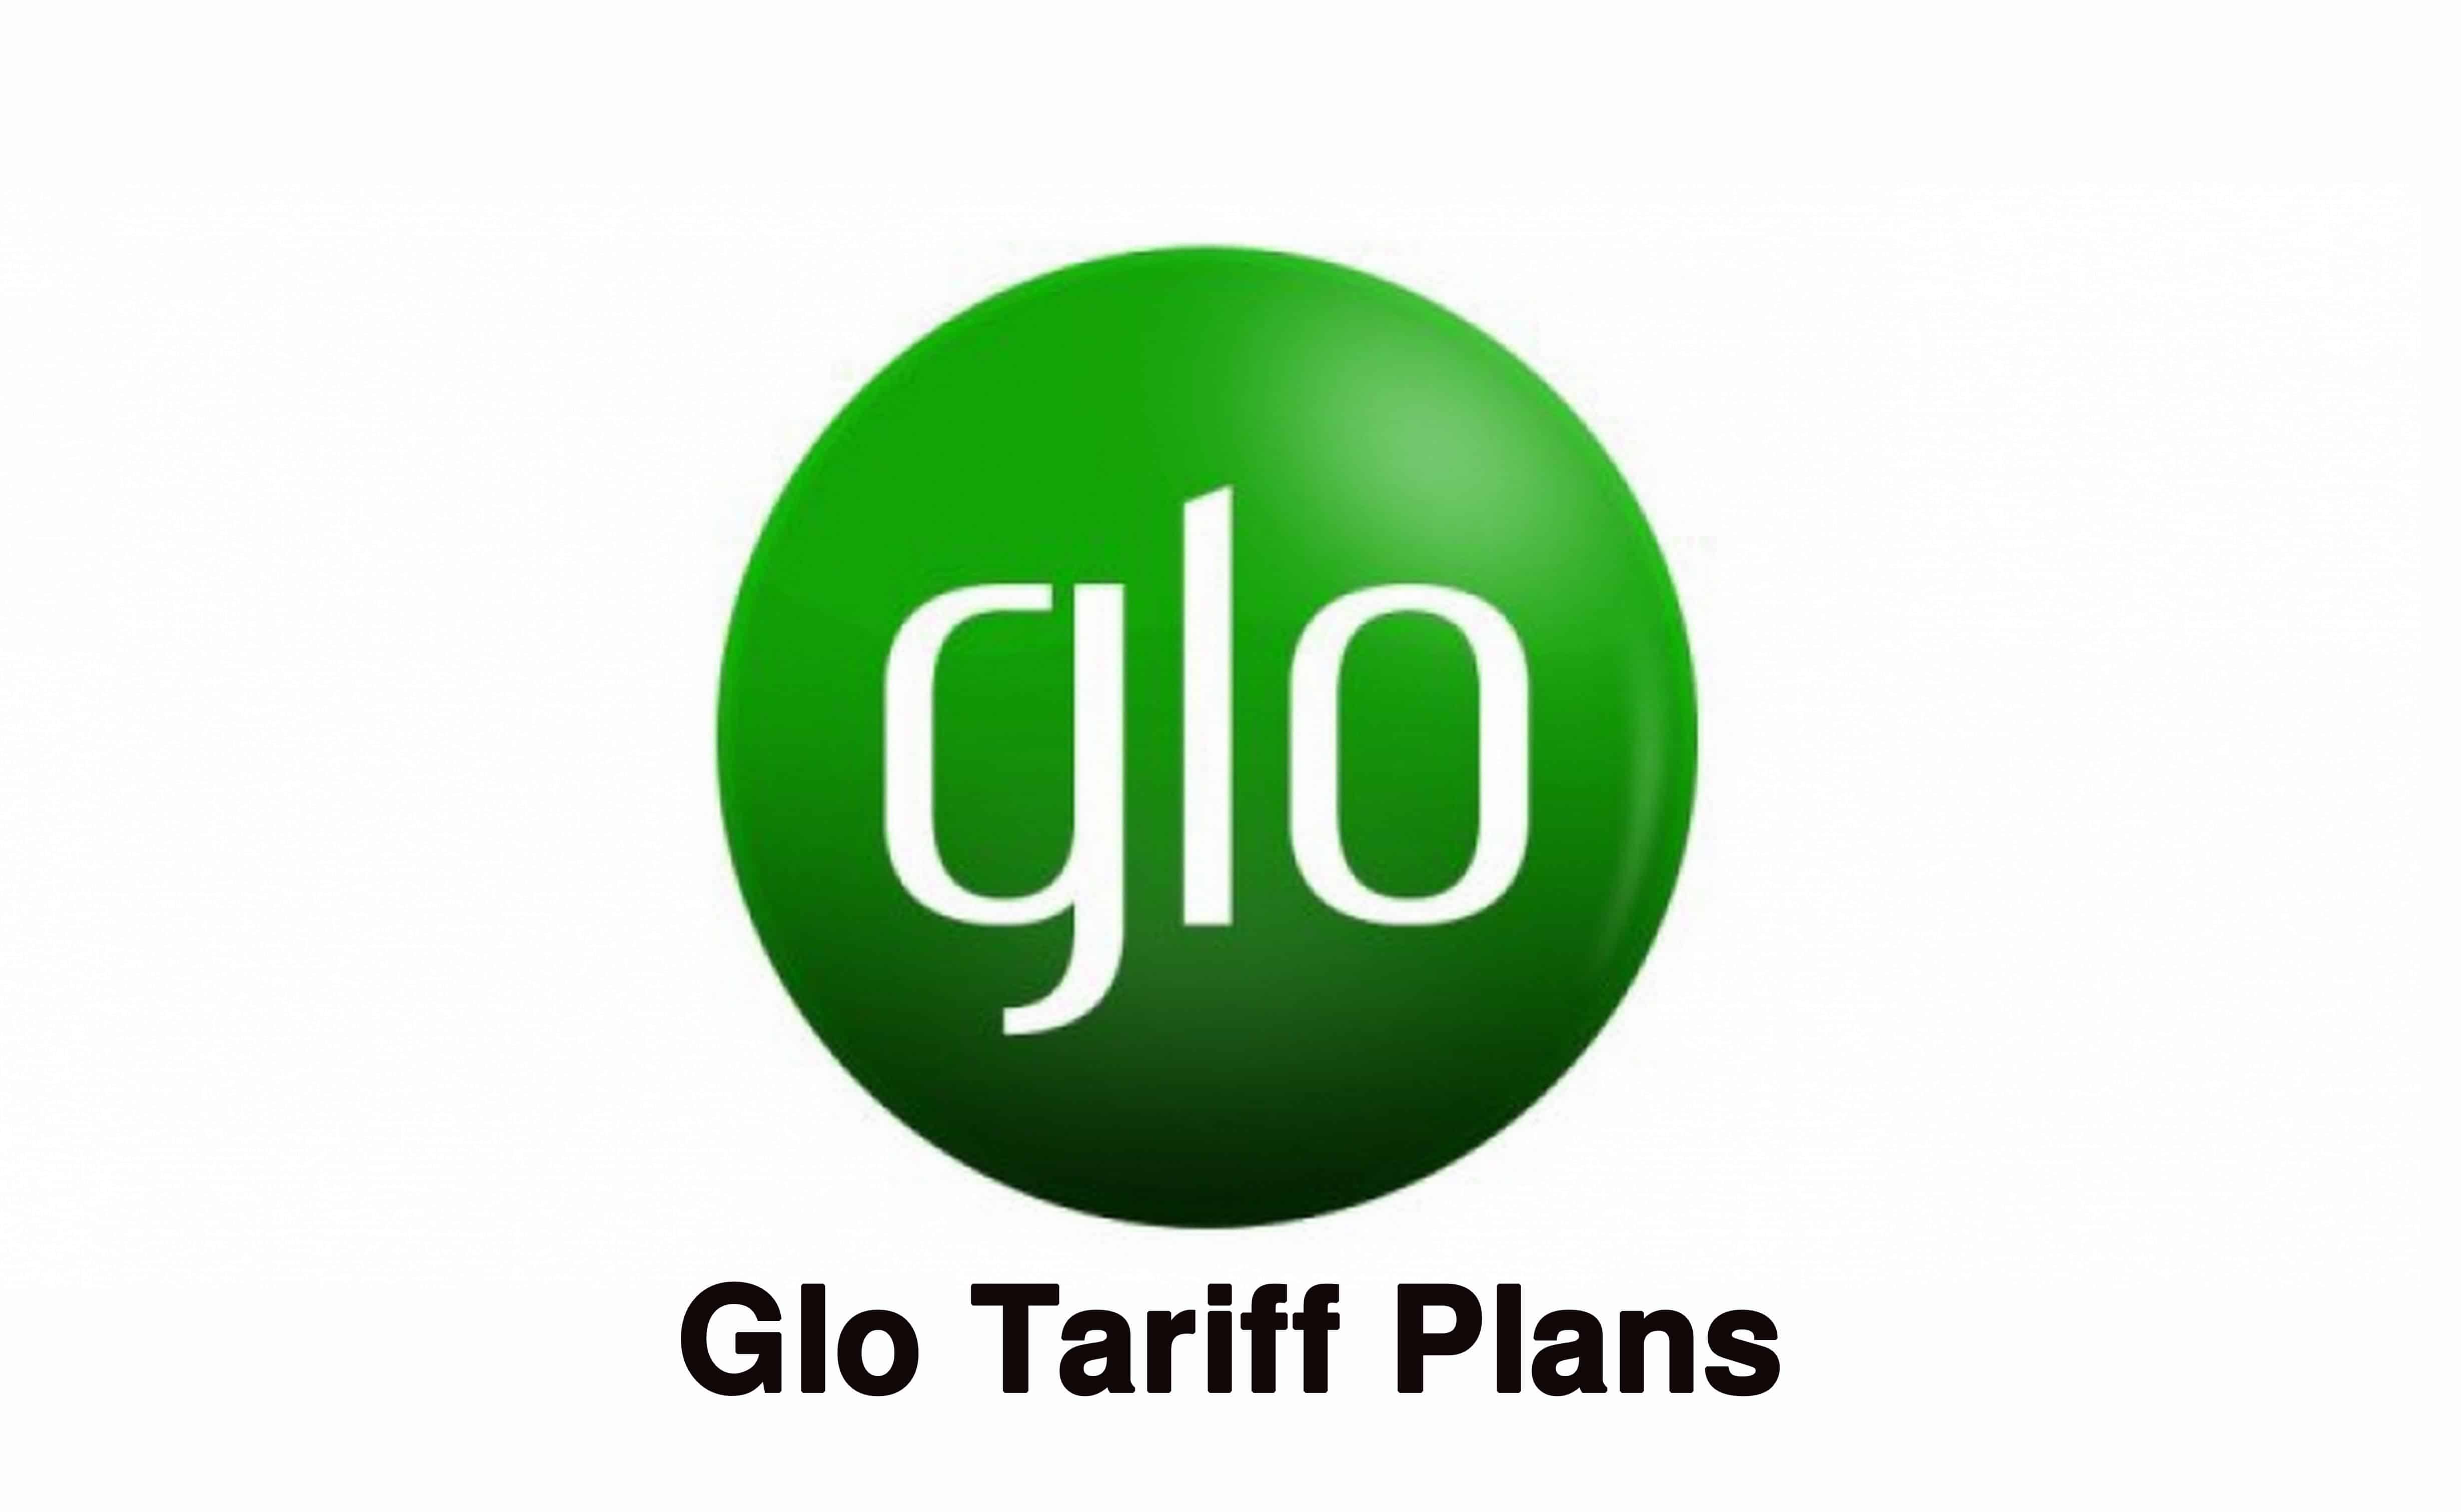 Glo Tariff Plans and Migration Codes